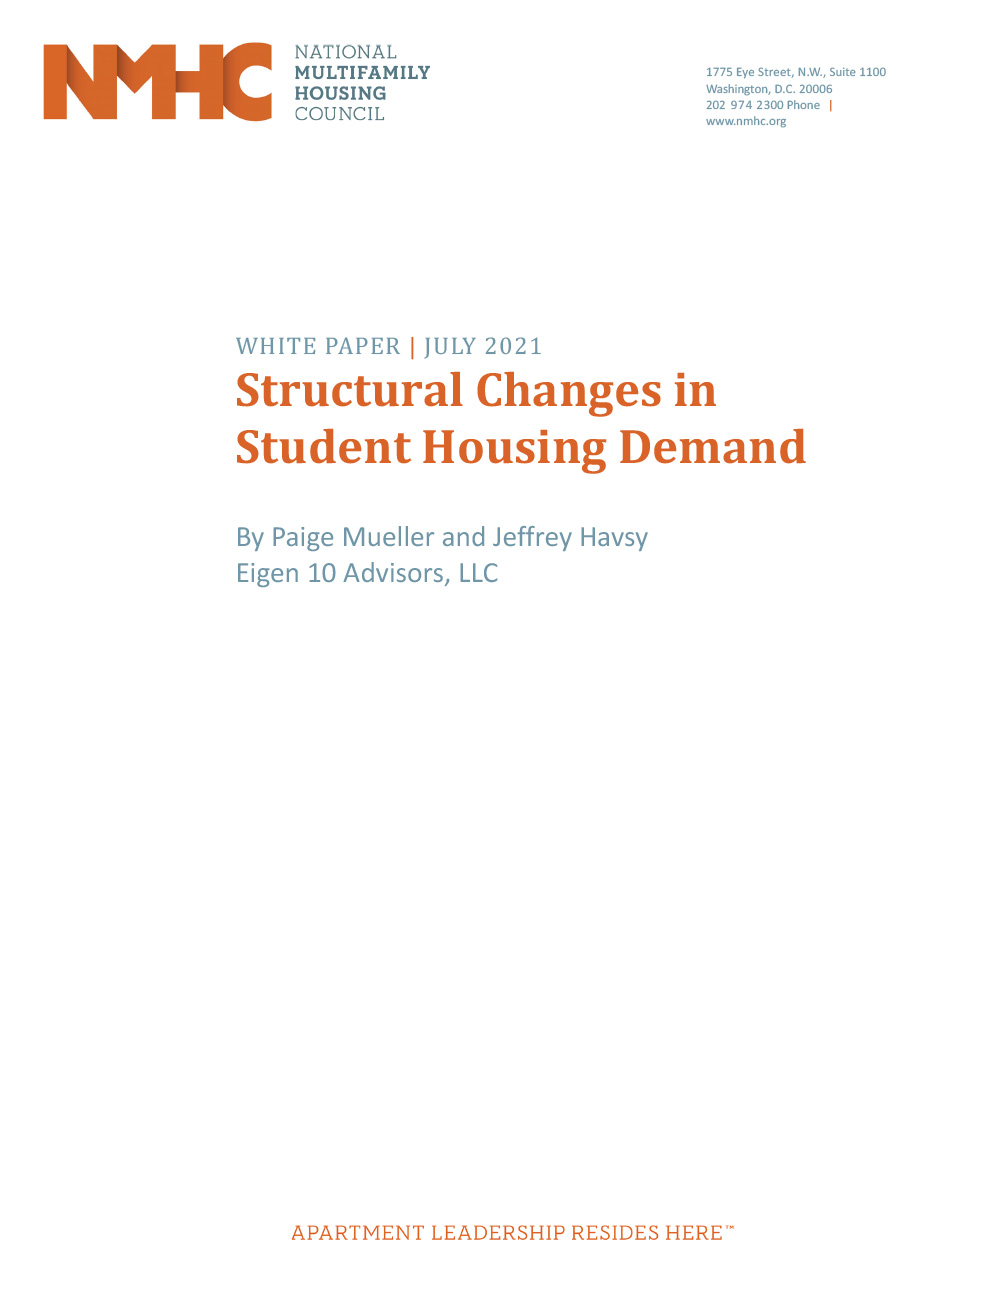 Structural Changes in Student Housing